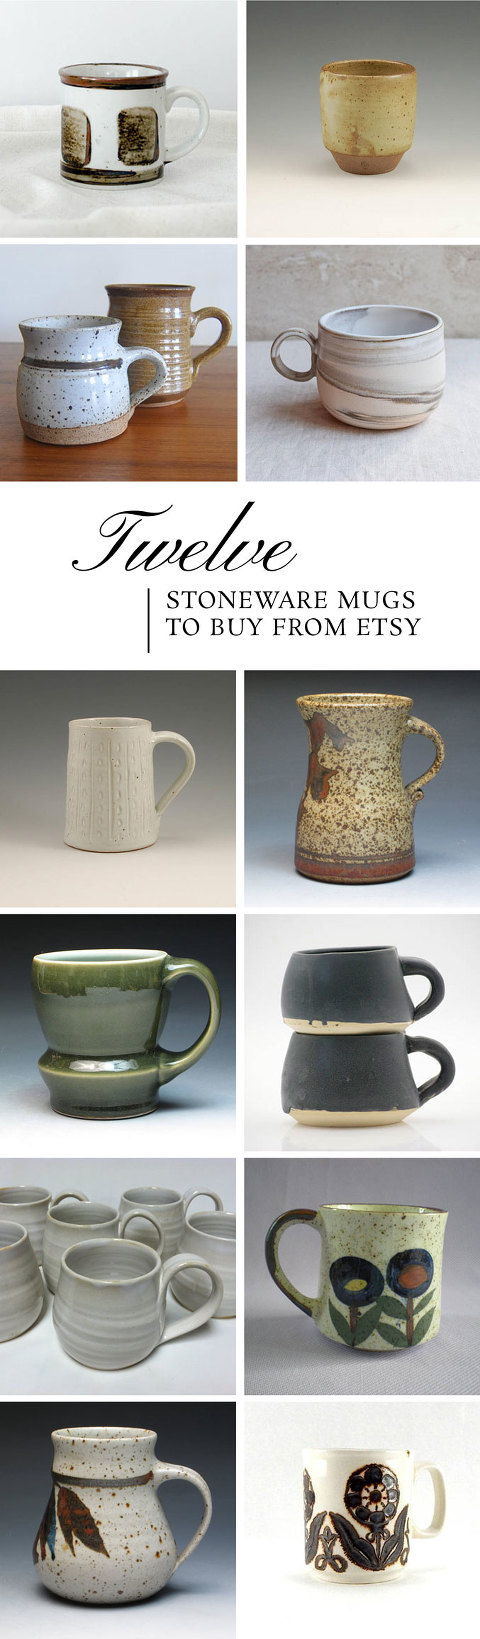 12 Stoneware Mugs To Buy From Etsy